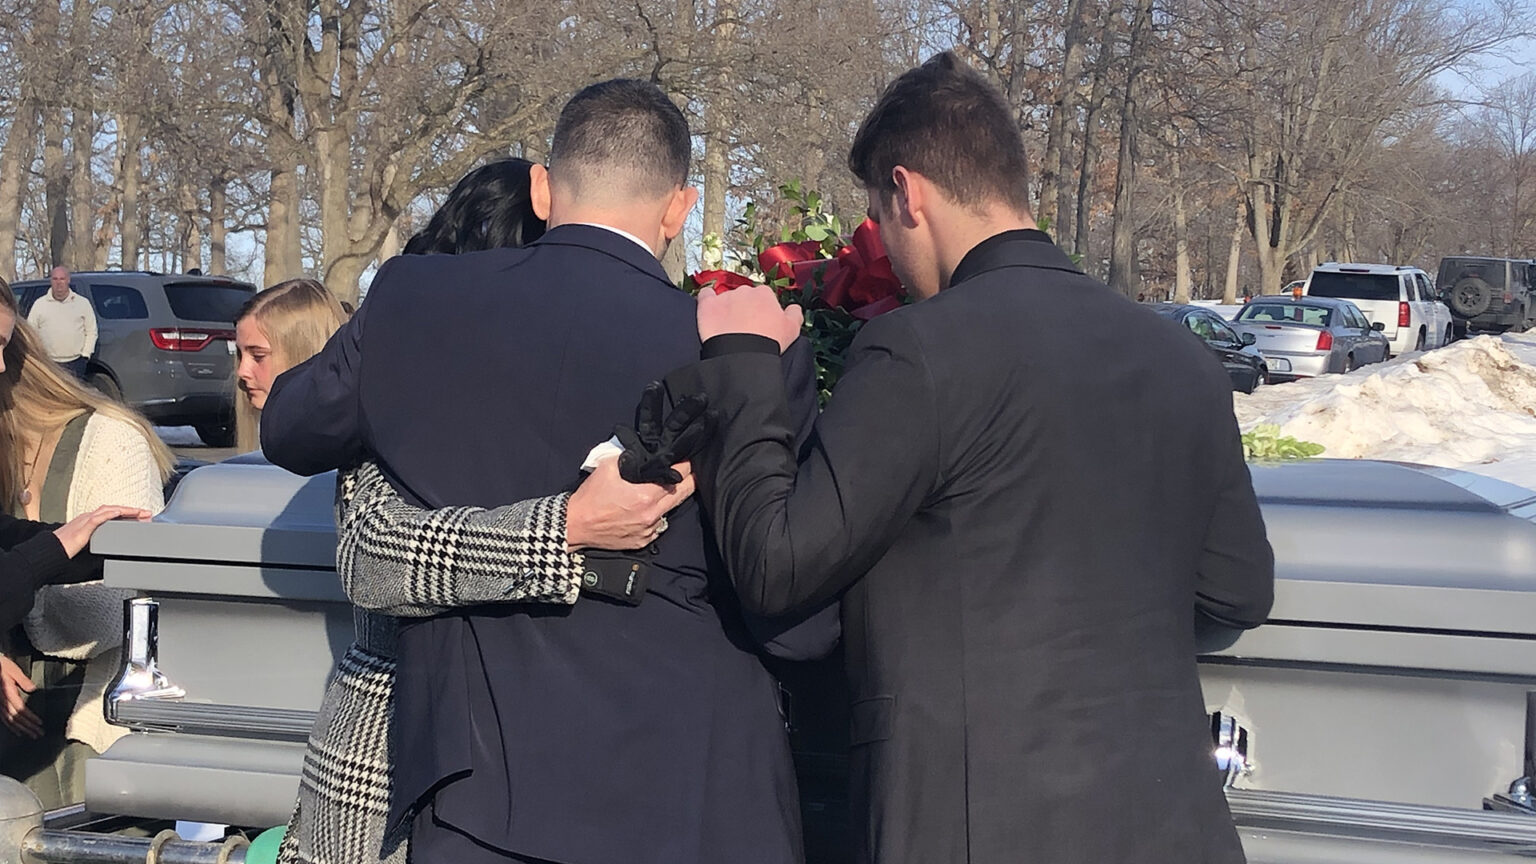 Erin, Rich and Caden Rachwal hold their arms around each other and bow their heads while facing a closed casket while standing outdoors, with other people, parked cars, leafless trees and snow drifts in the background.